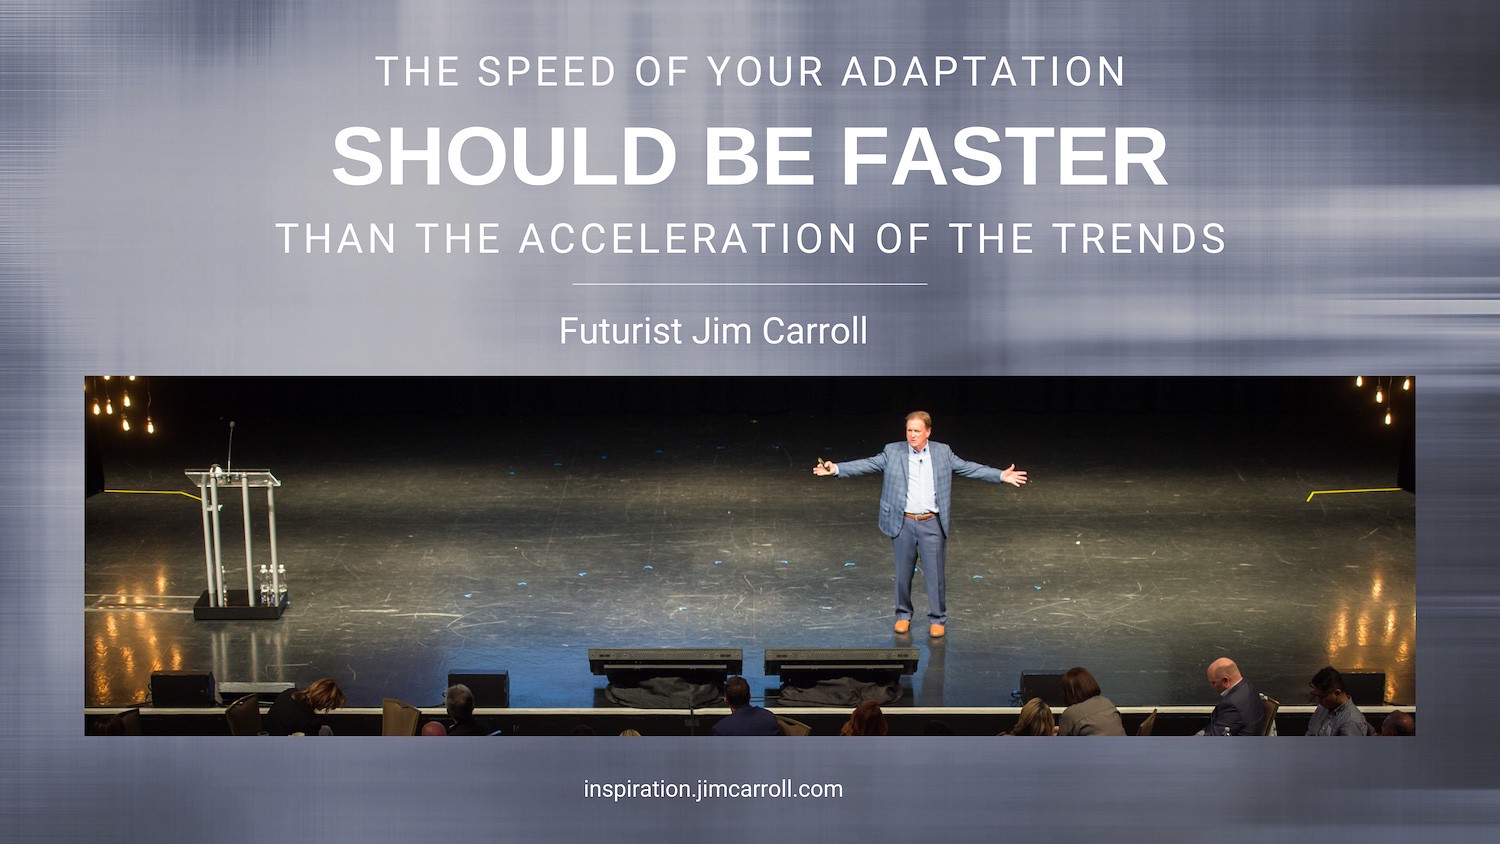 "The speed of your adaptation should be faster than the acceleration of the trends!"